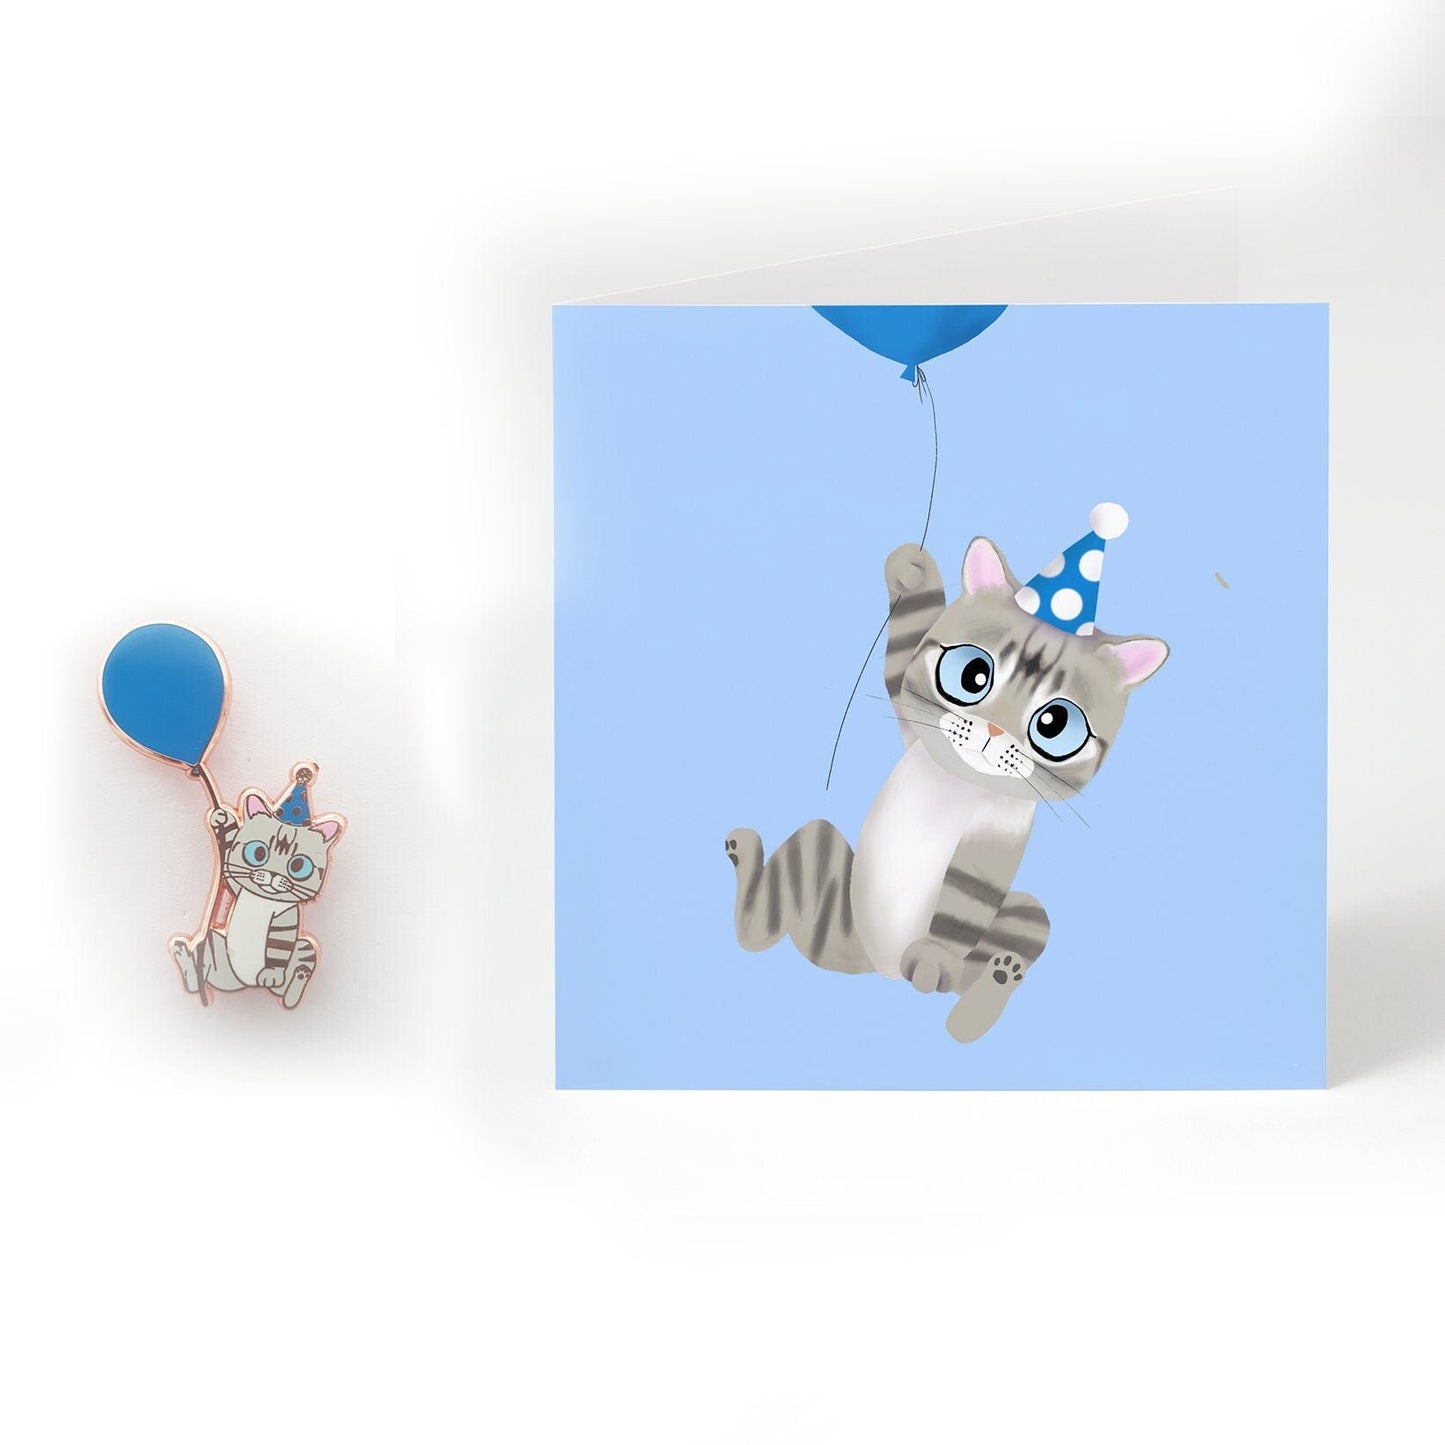 Cute Grey Tabby Cat with Blue Balloon, Birthday Greeting Card (feat. Roo the Special Needs Cat), Charity Card, Greeting Cards/Postcards, Greeting & Note Cards